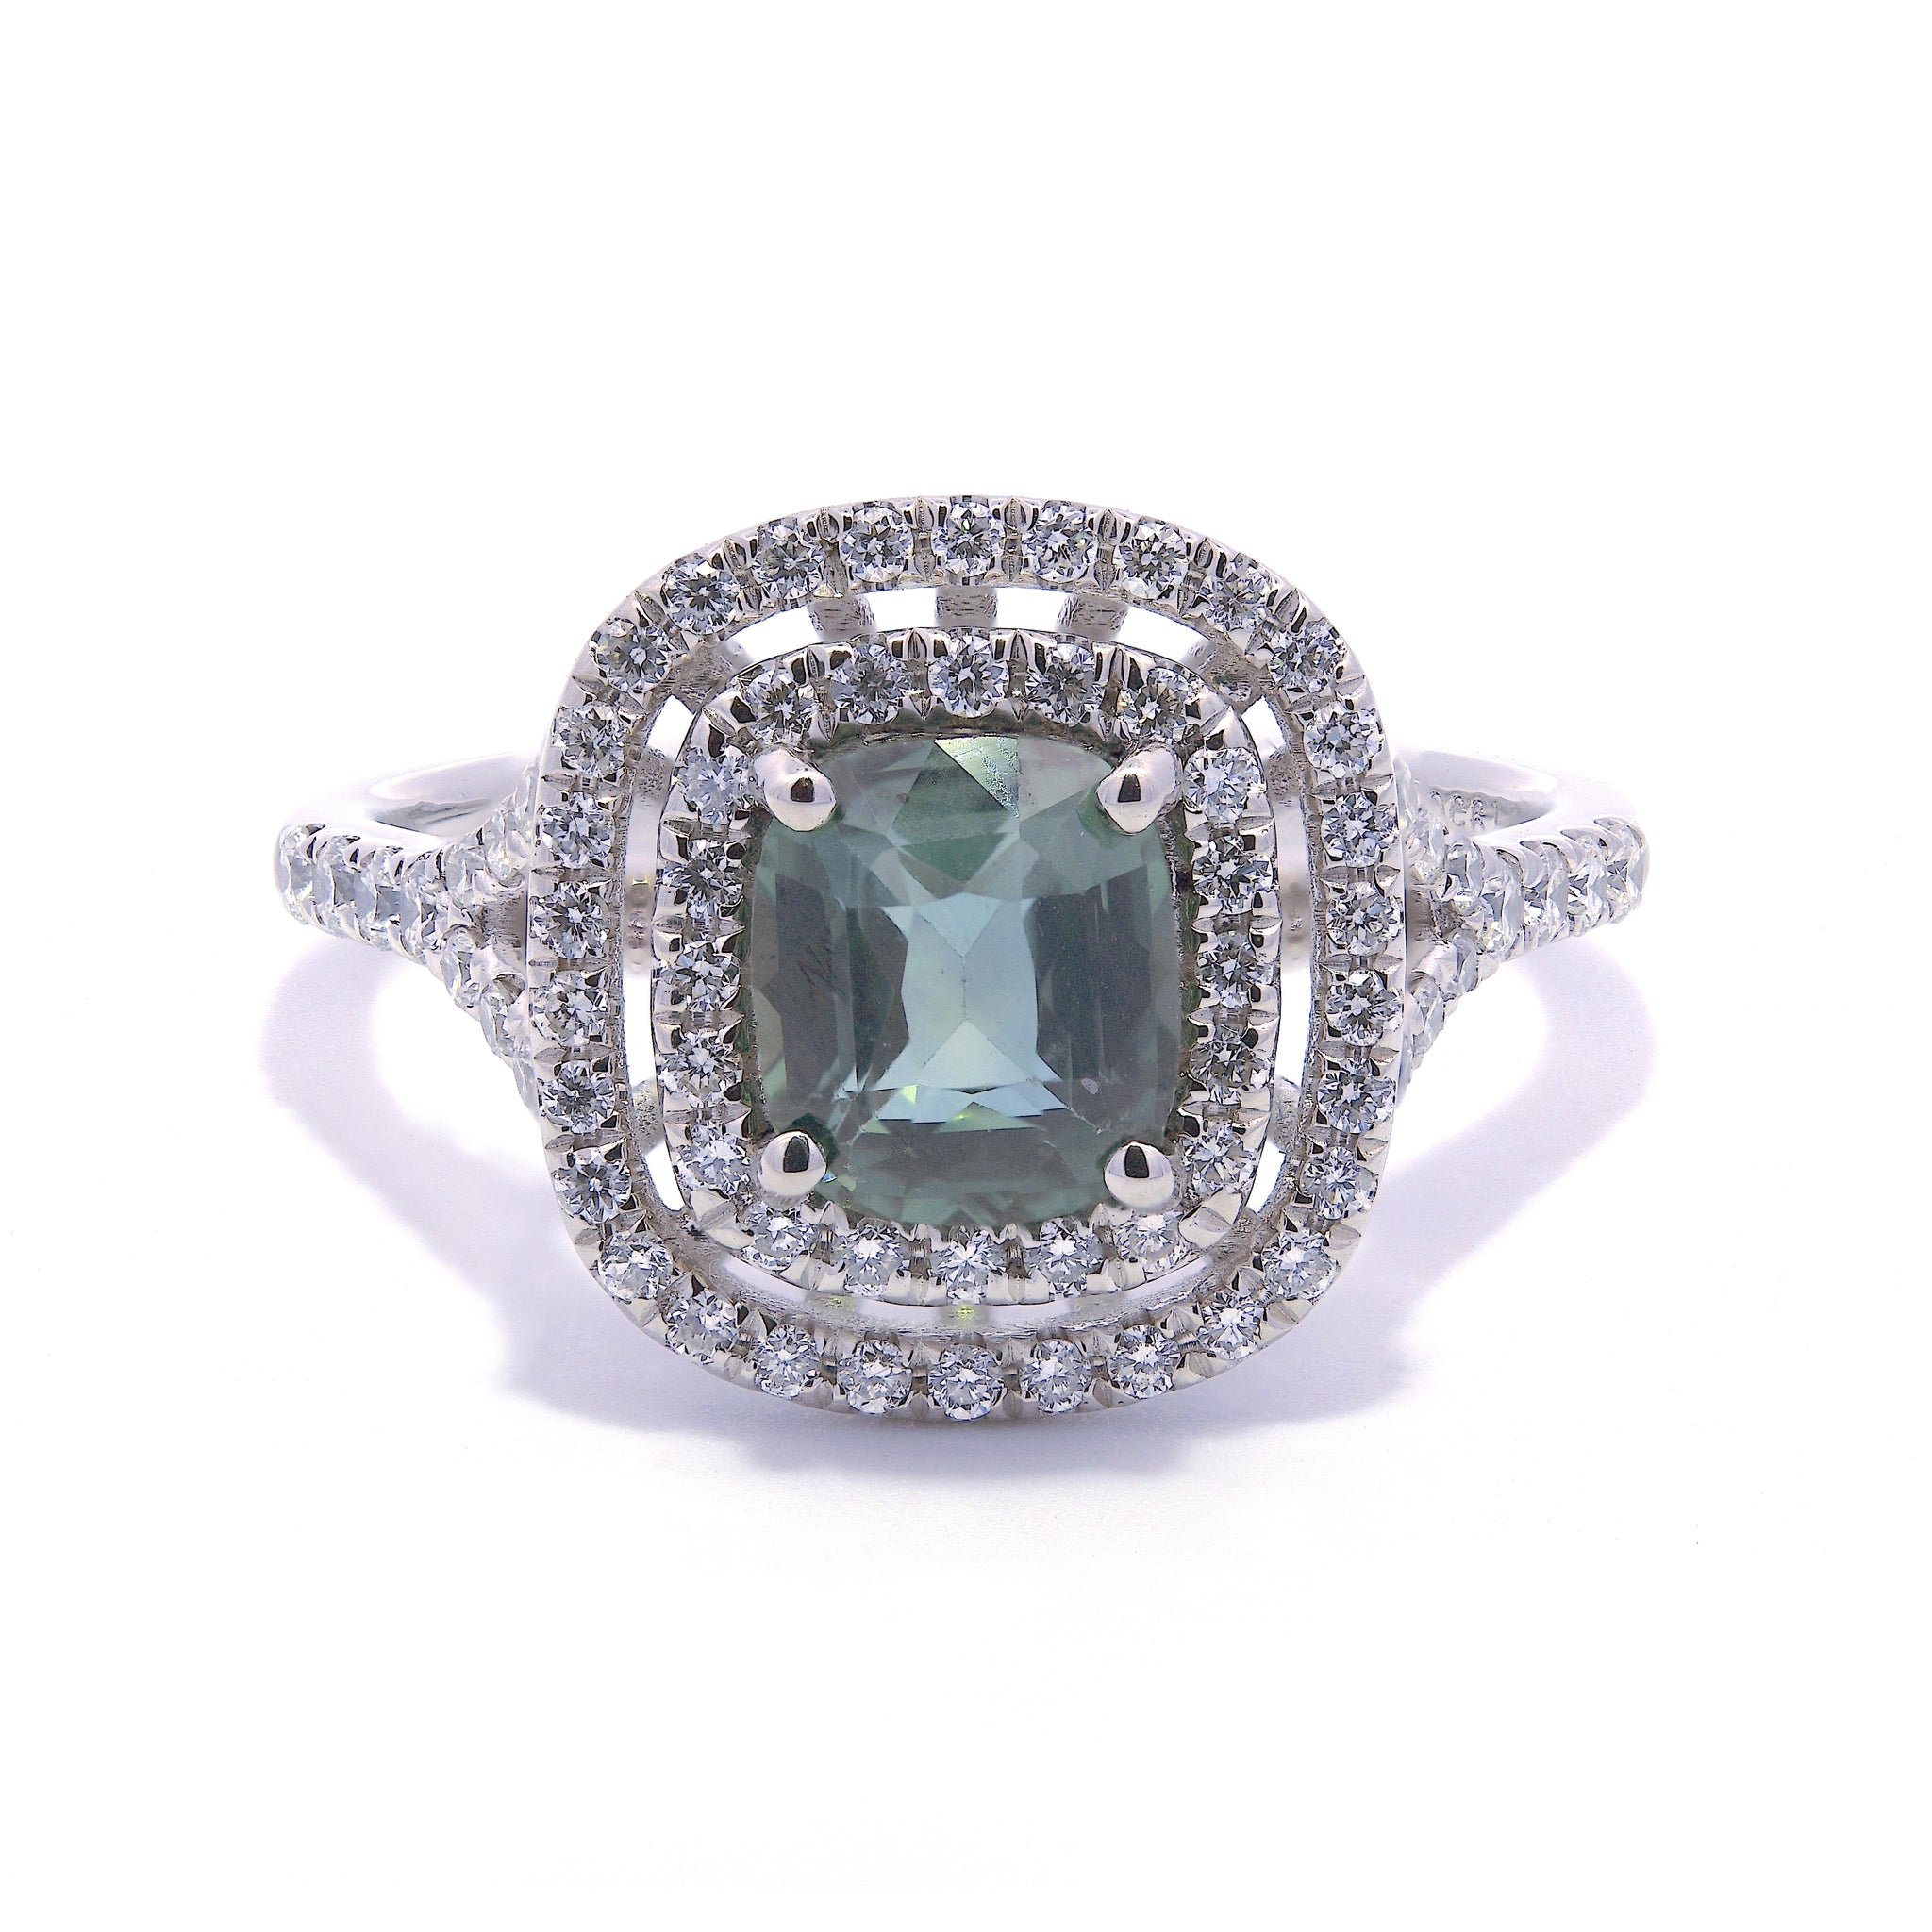 Platinum 1.13ct Cushion Cut Teal Sapphire Ring With 0.41ct Double Diamond Halo And Diamond Set Split Shoulders